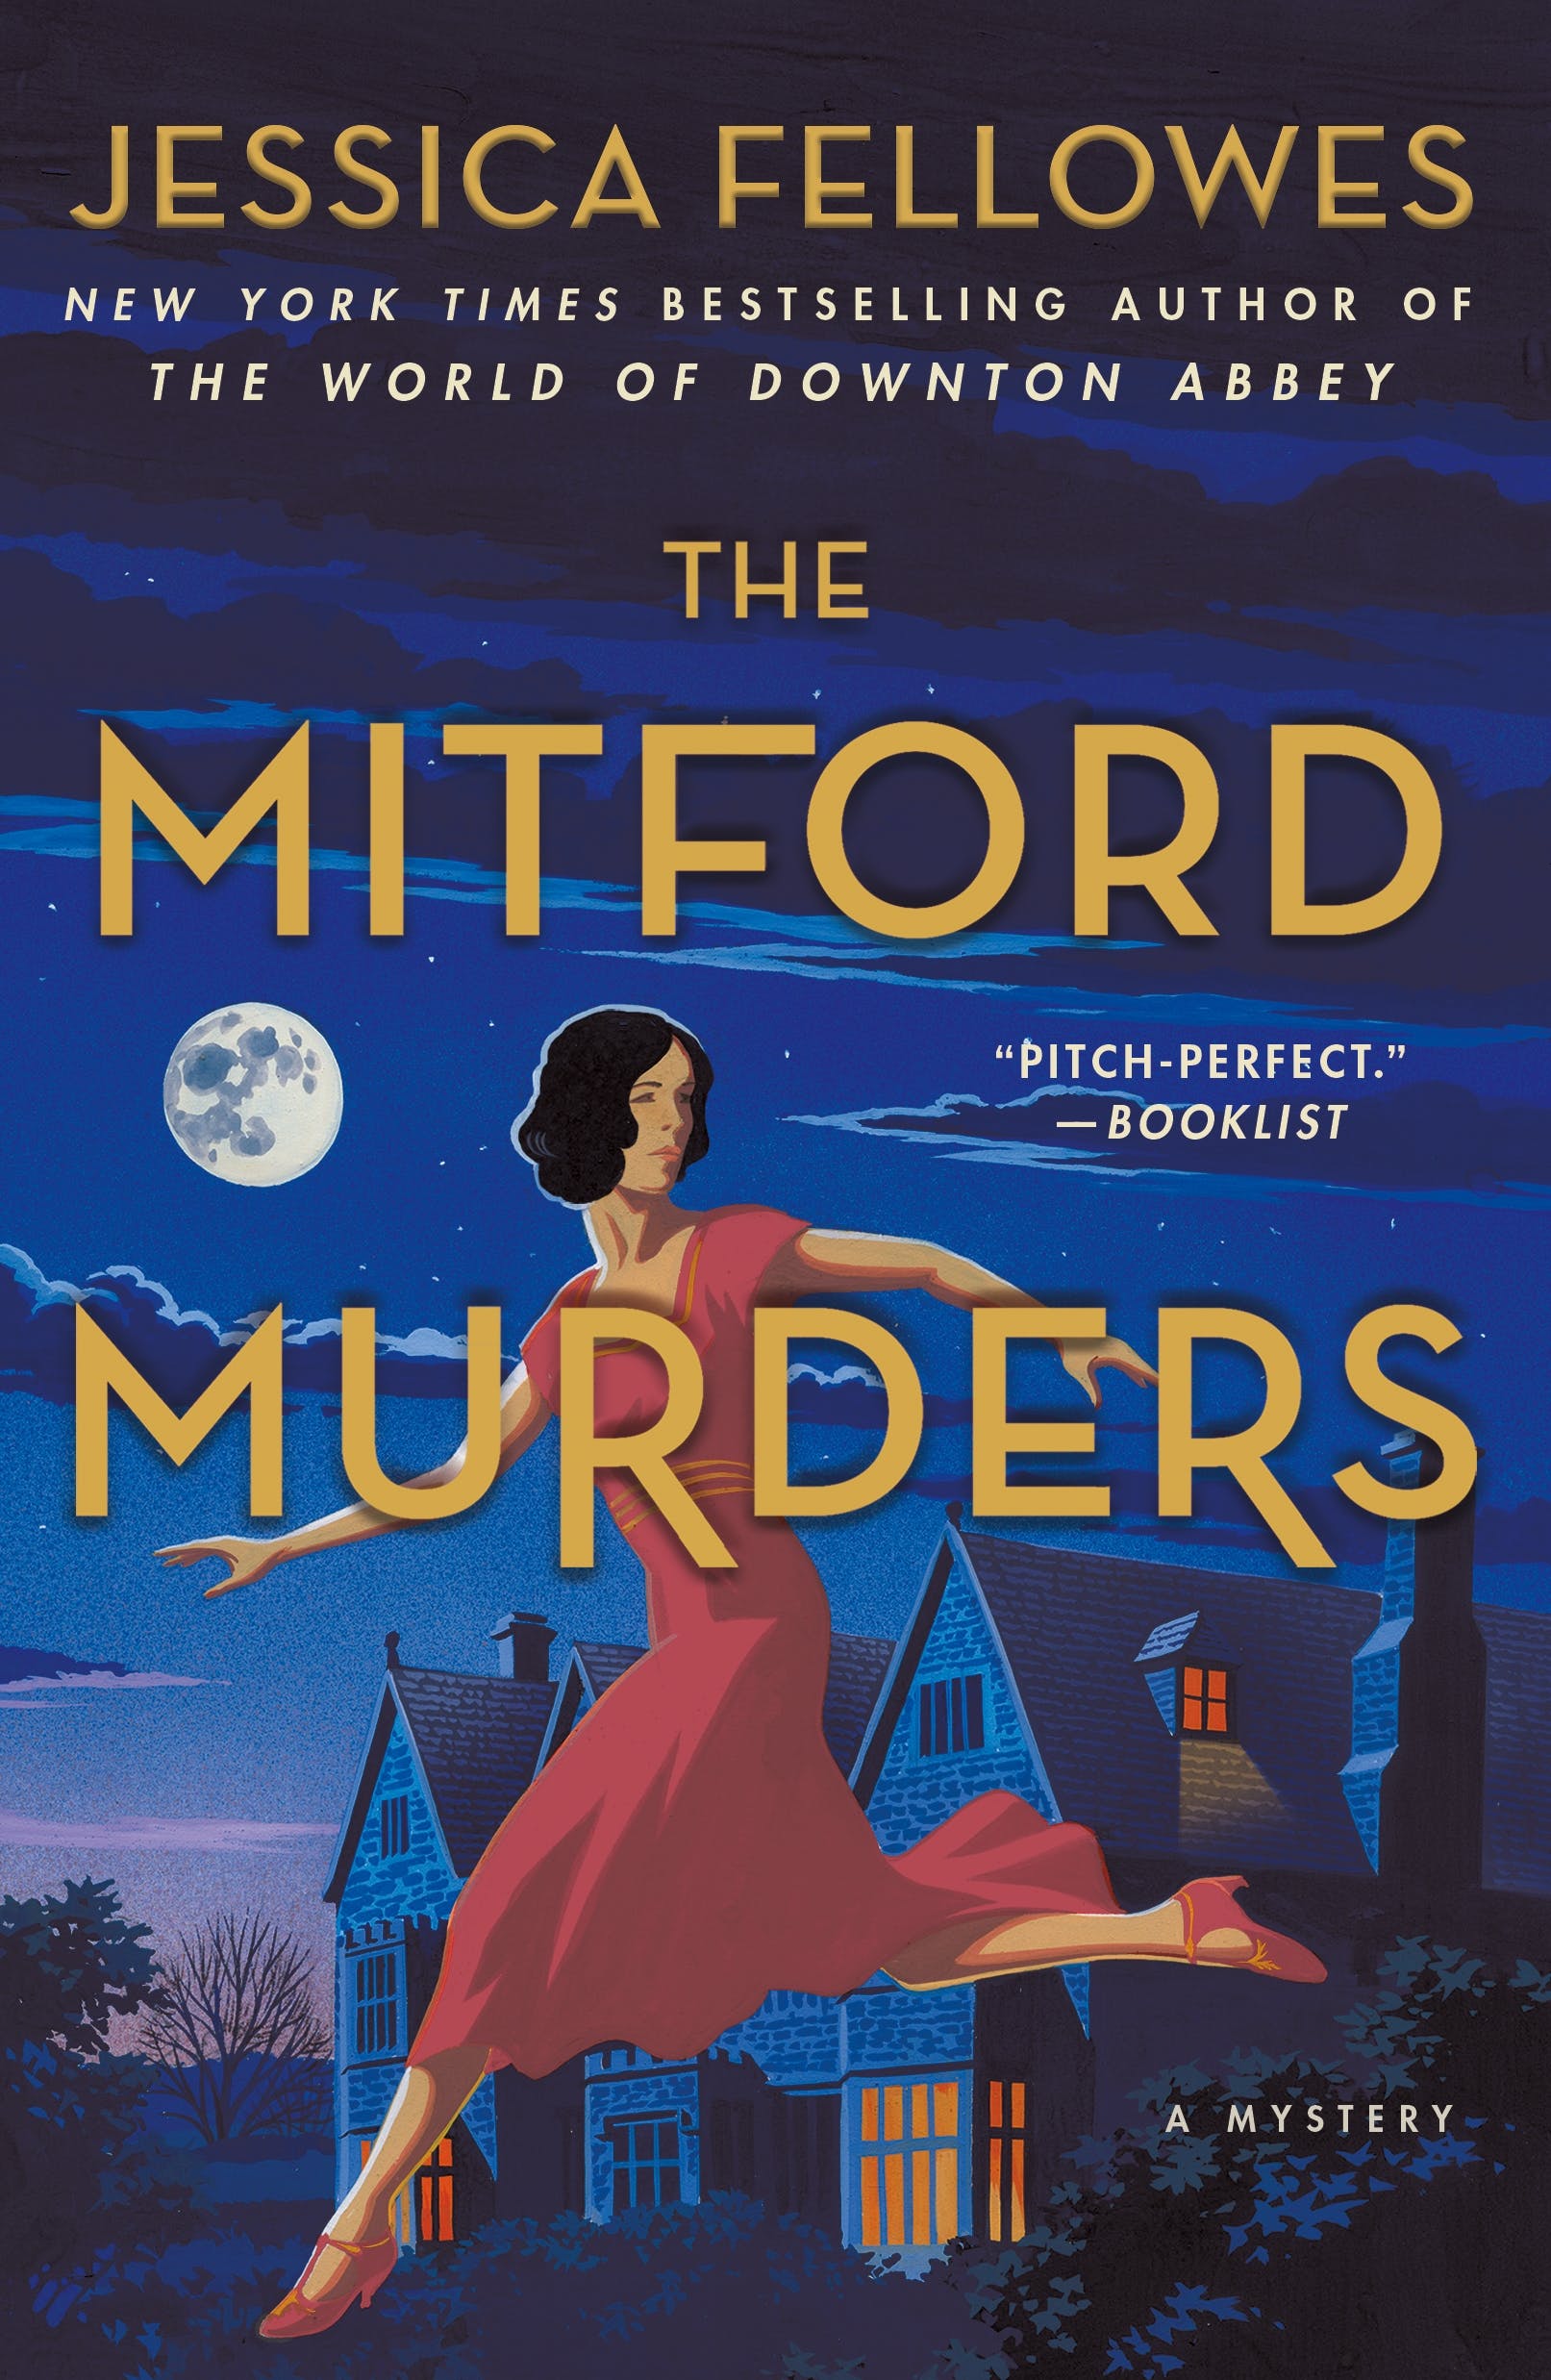 Cover of "The Mitford Murders" by Jessica Fellowes